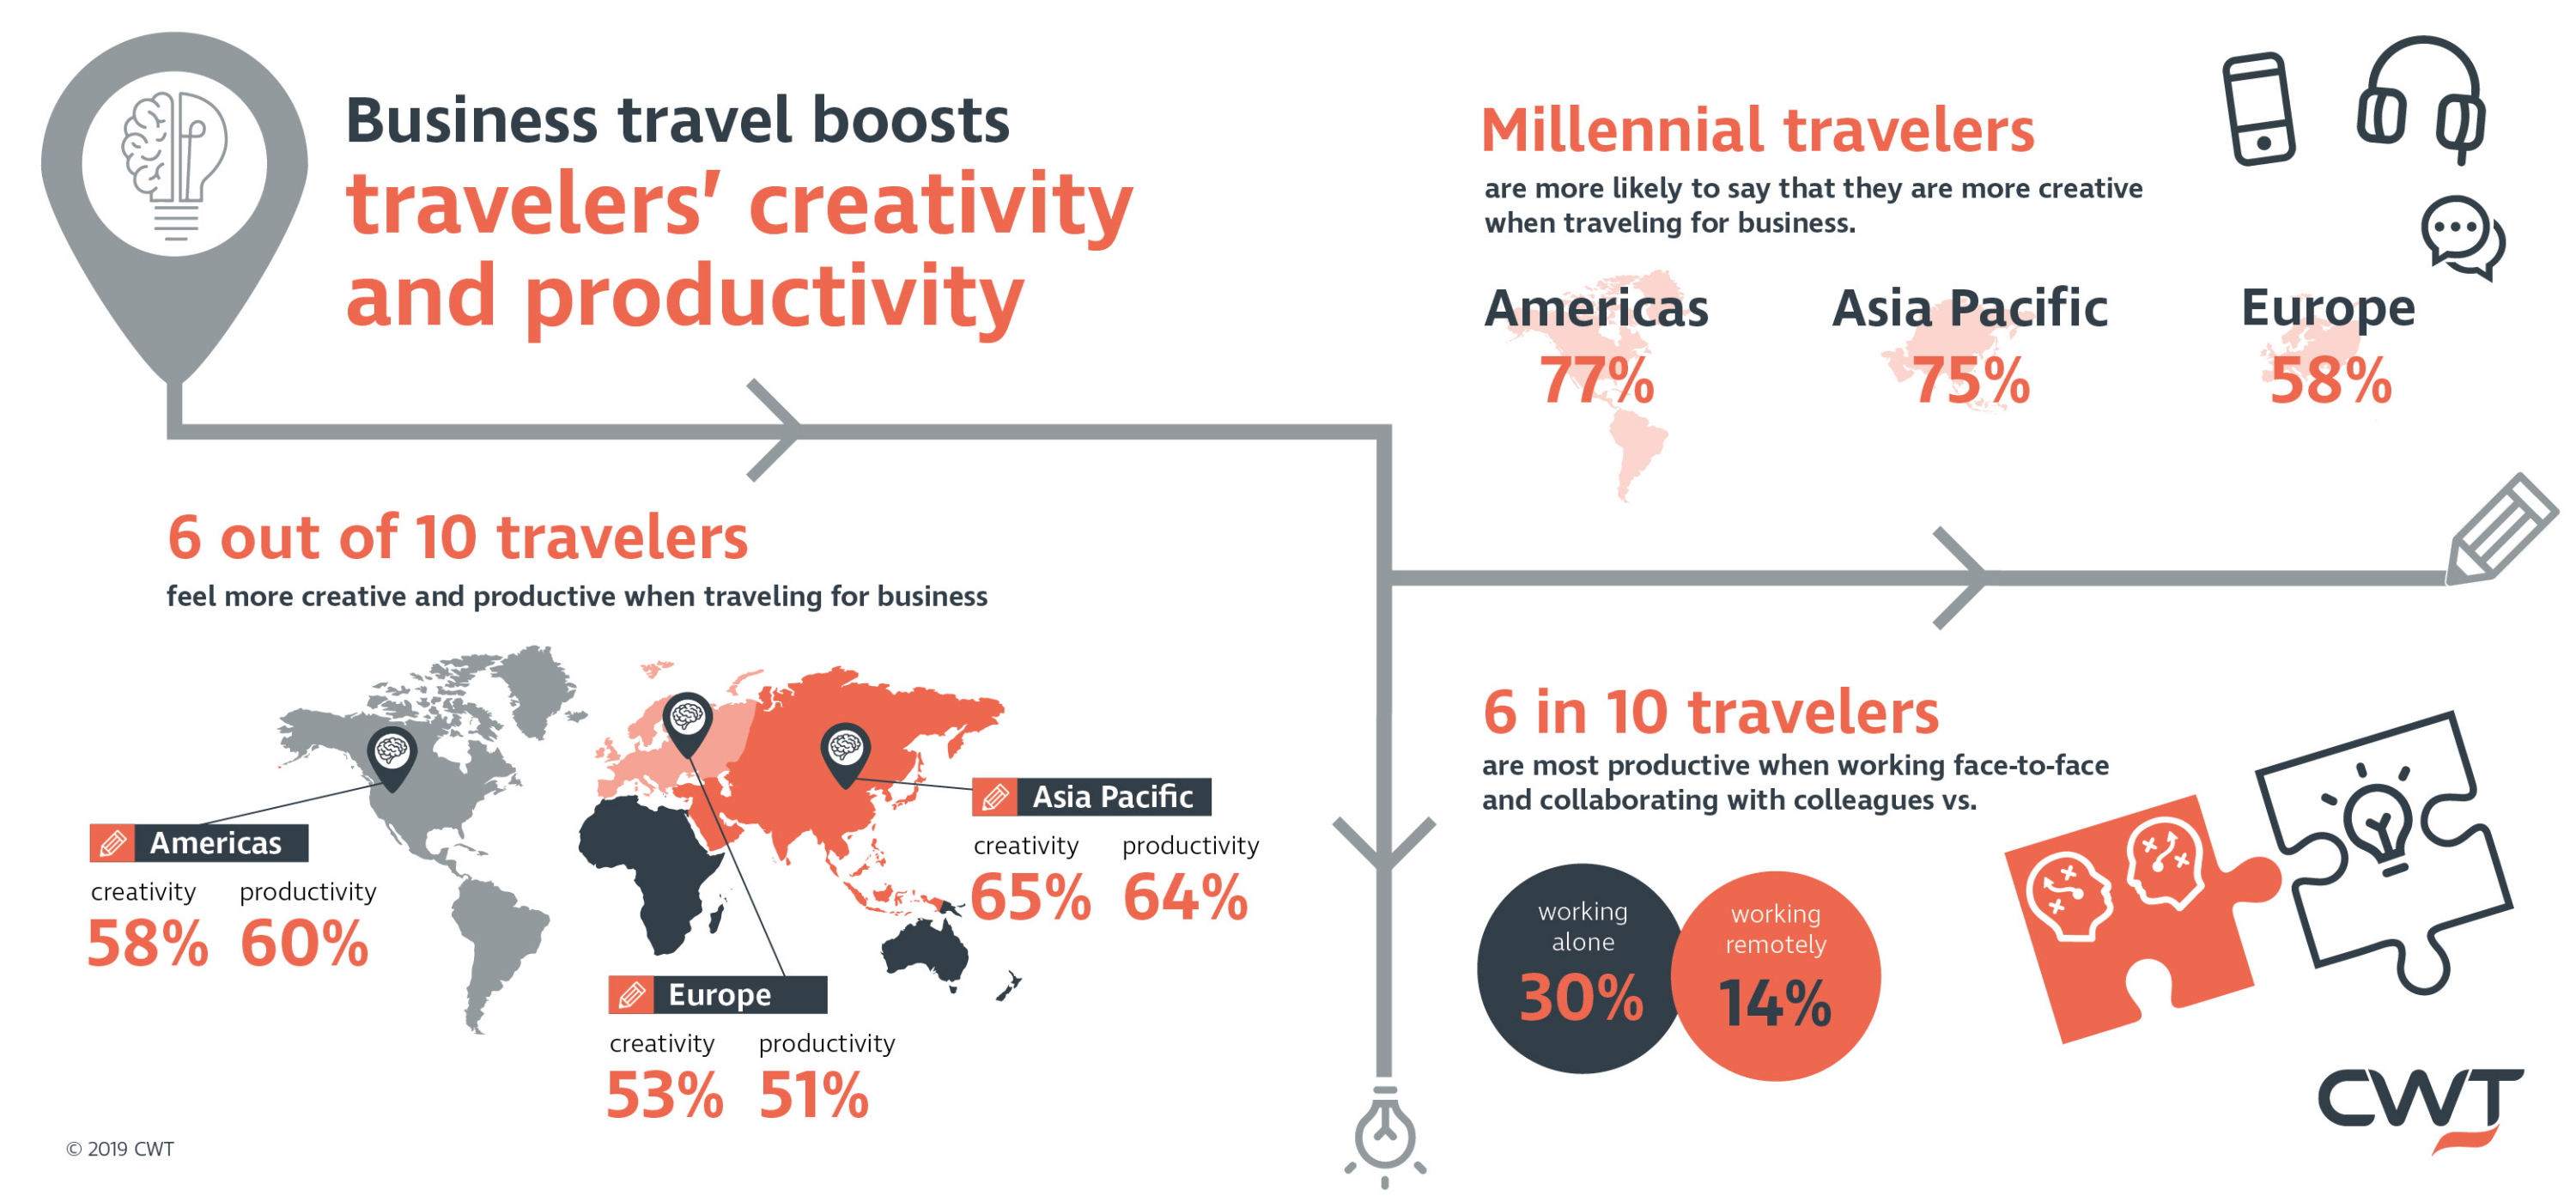 Research by CWT shows that six in ten travellers feel more creative and productive when travelling for business. Millennial travellers are more likely to say that they are more creative and productive when travelling for business. Those in the Americas lead the way (77% feeling more creative and productive), followed closely by those in Asia Pacific (75% feeling more creative and 73% more productive). European millennials rank third (58% and 57% respectively). Click to enlarge.